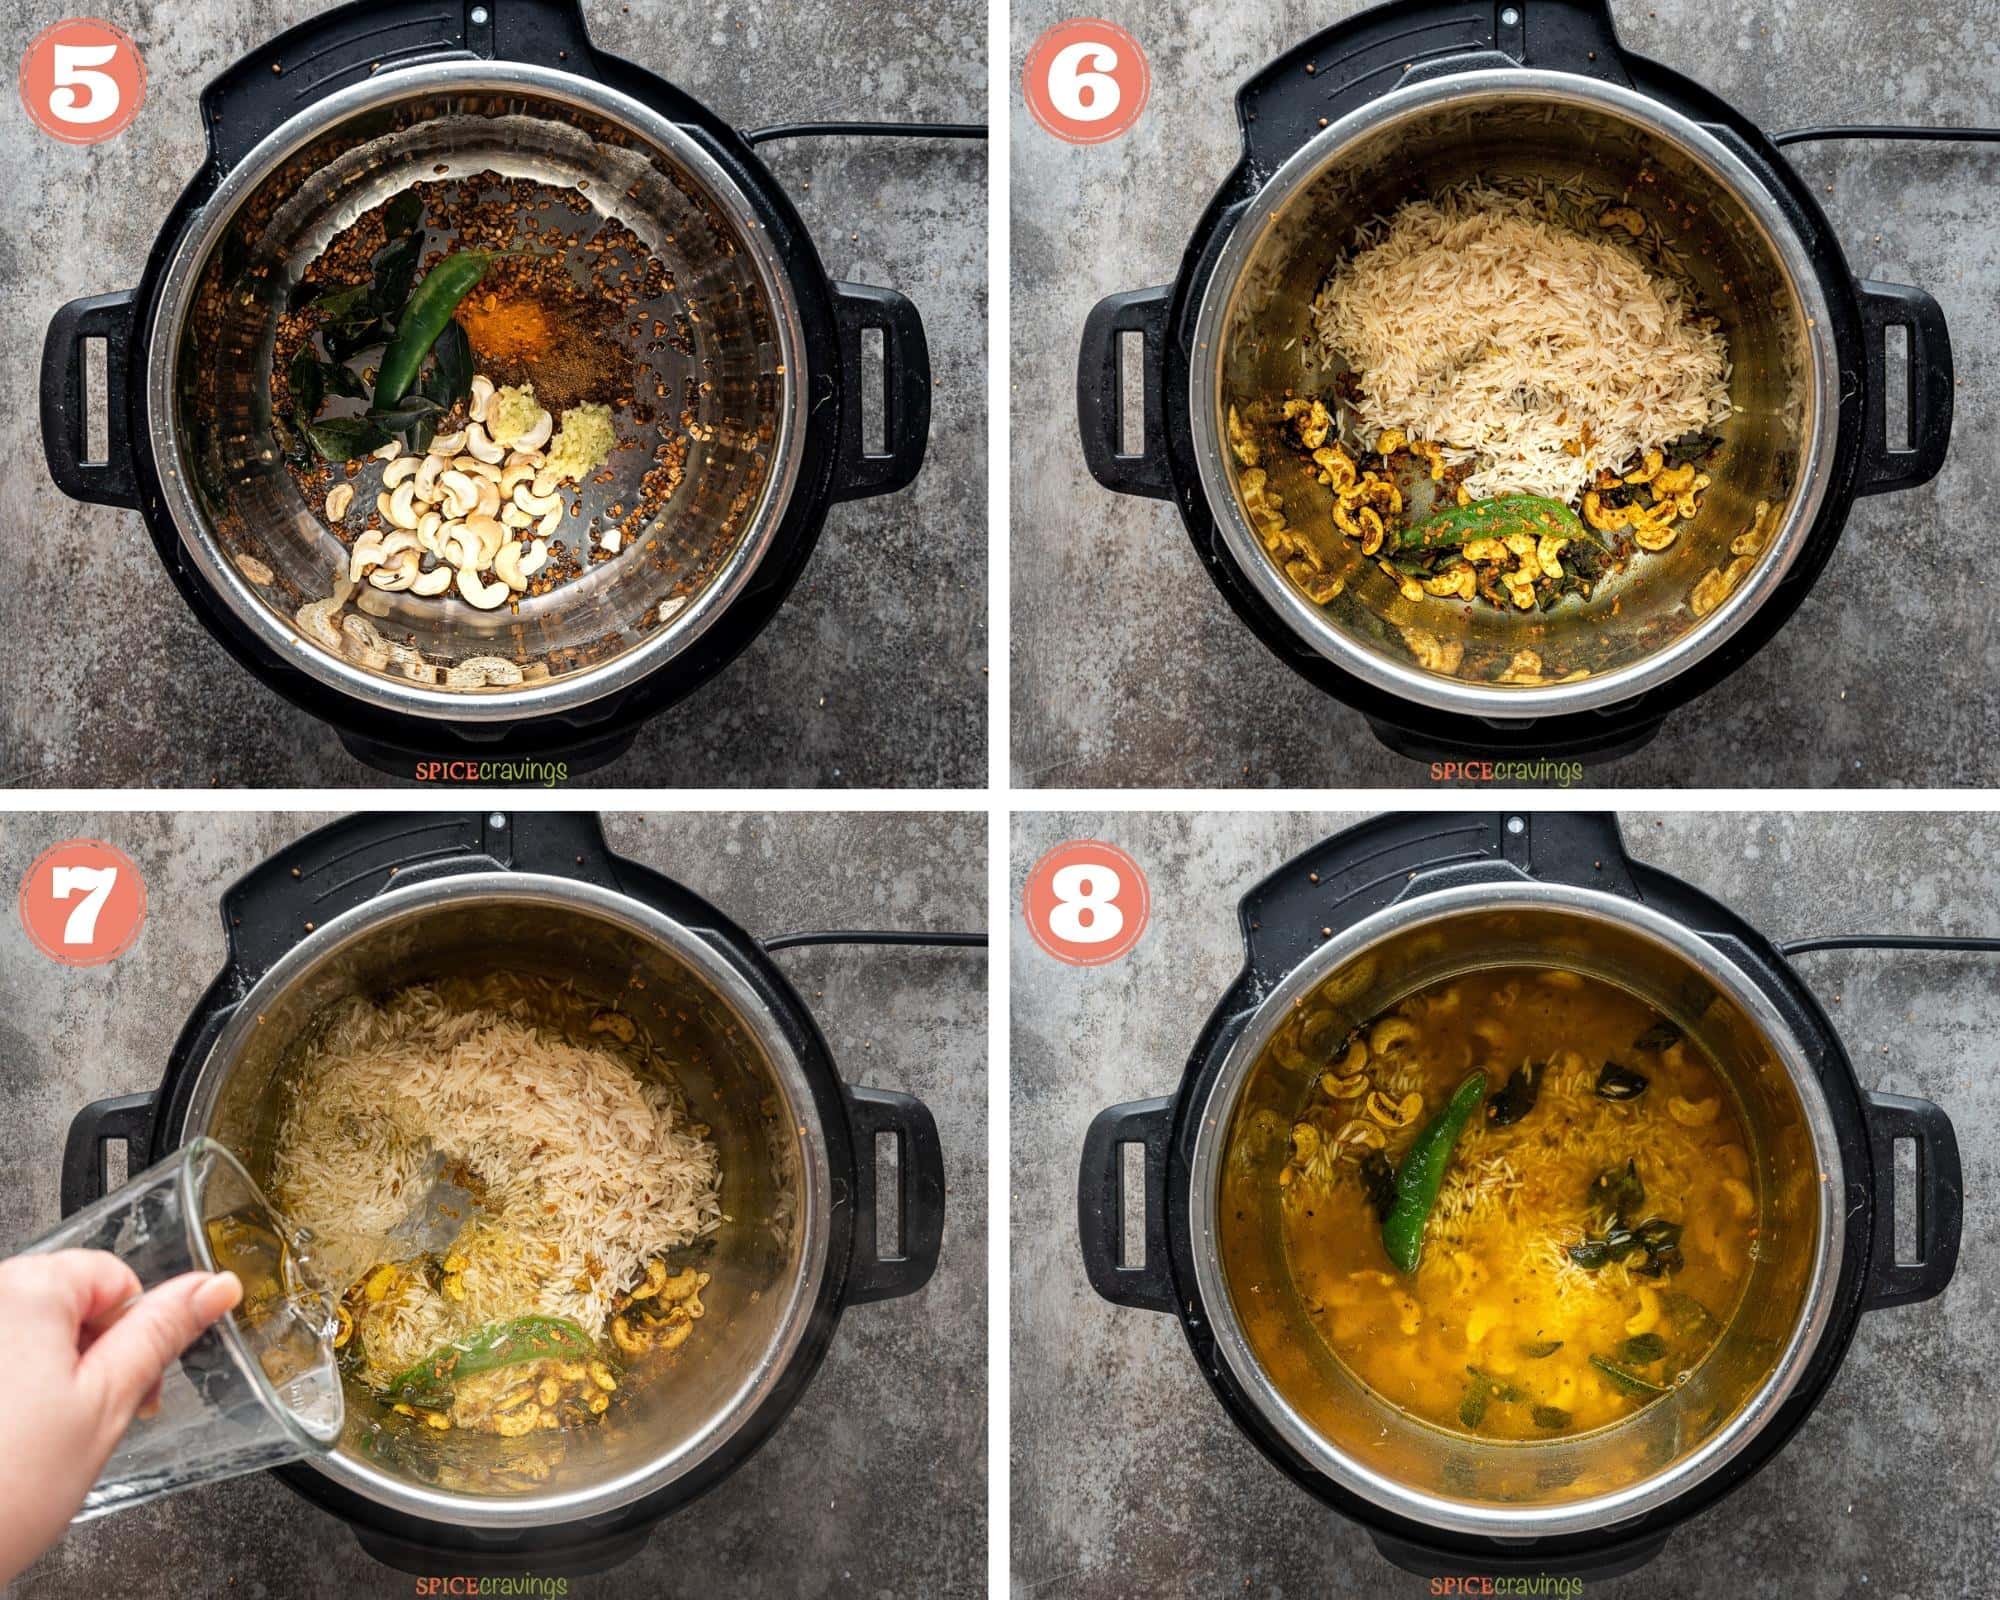 4-image grid showing how to assemble lemon rice in instant pot